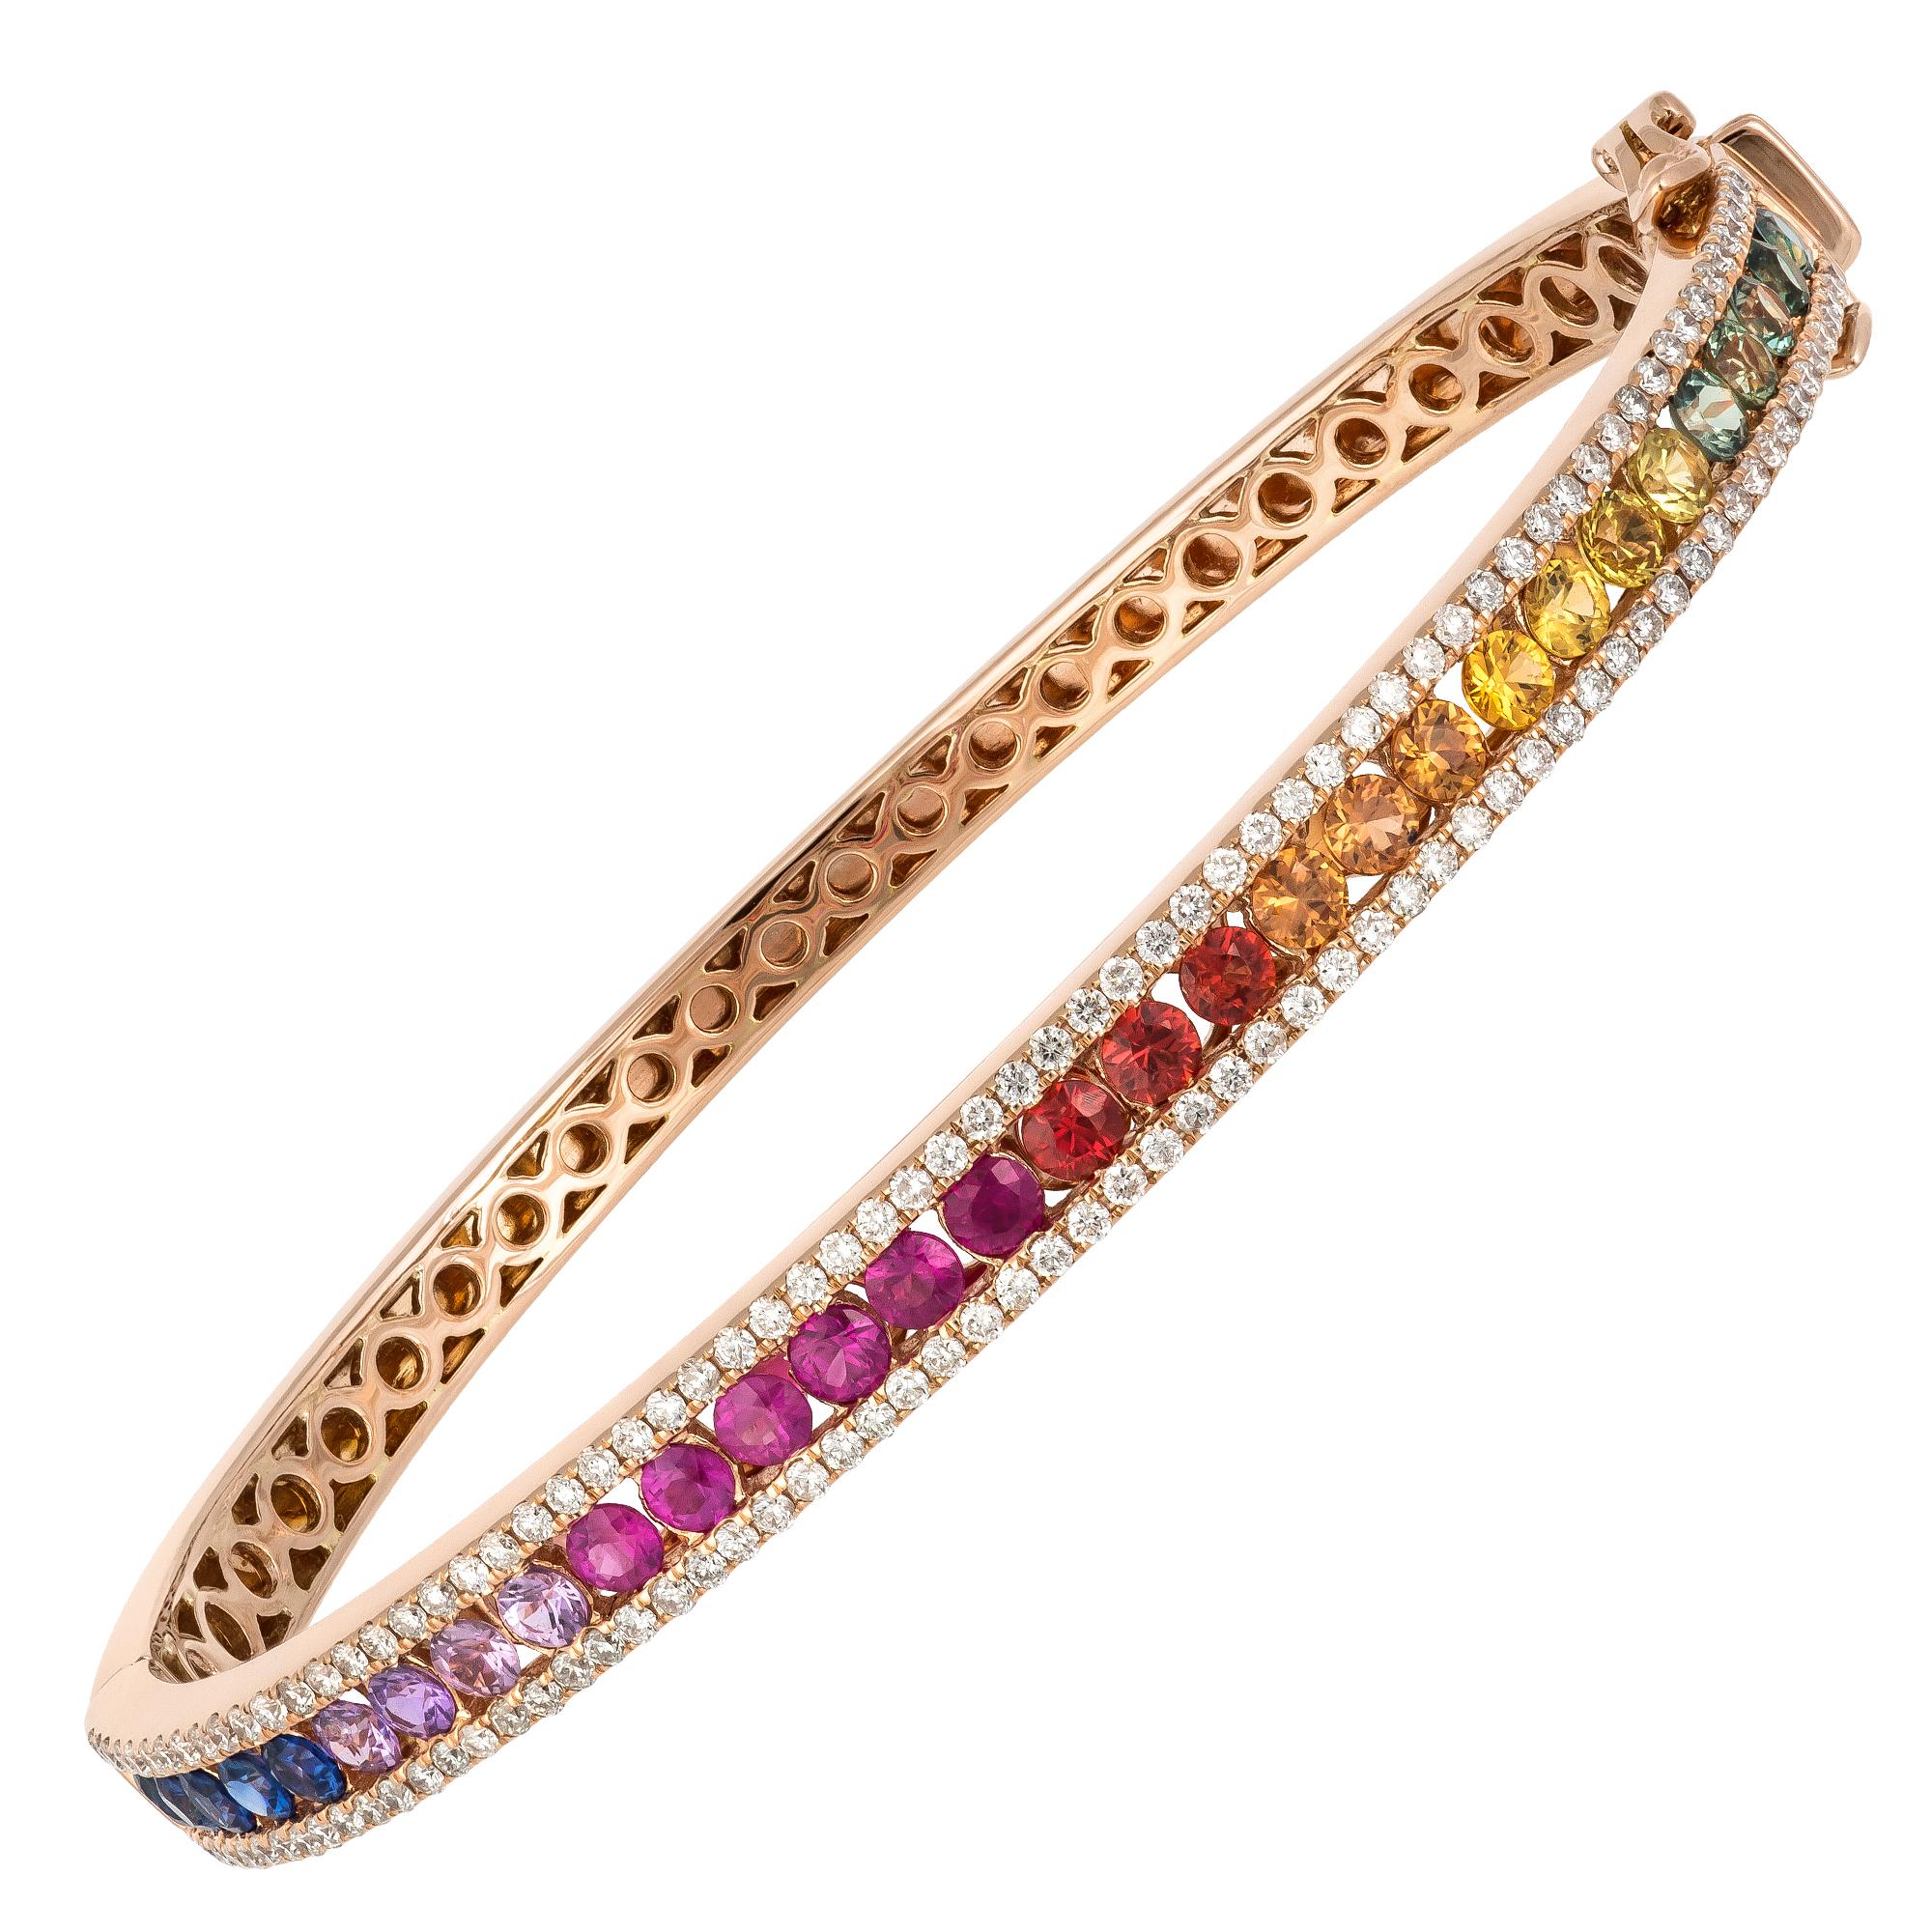 Diamond Tennis Bangle Bracelet 18K Rose Gold Diamond 0.78 Cts/130 Pcs Multi In New Condition For Sale In Montreux, CH